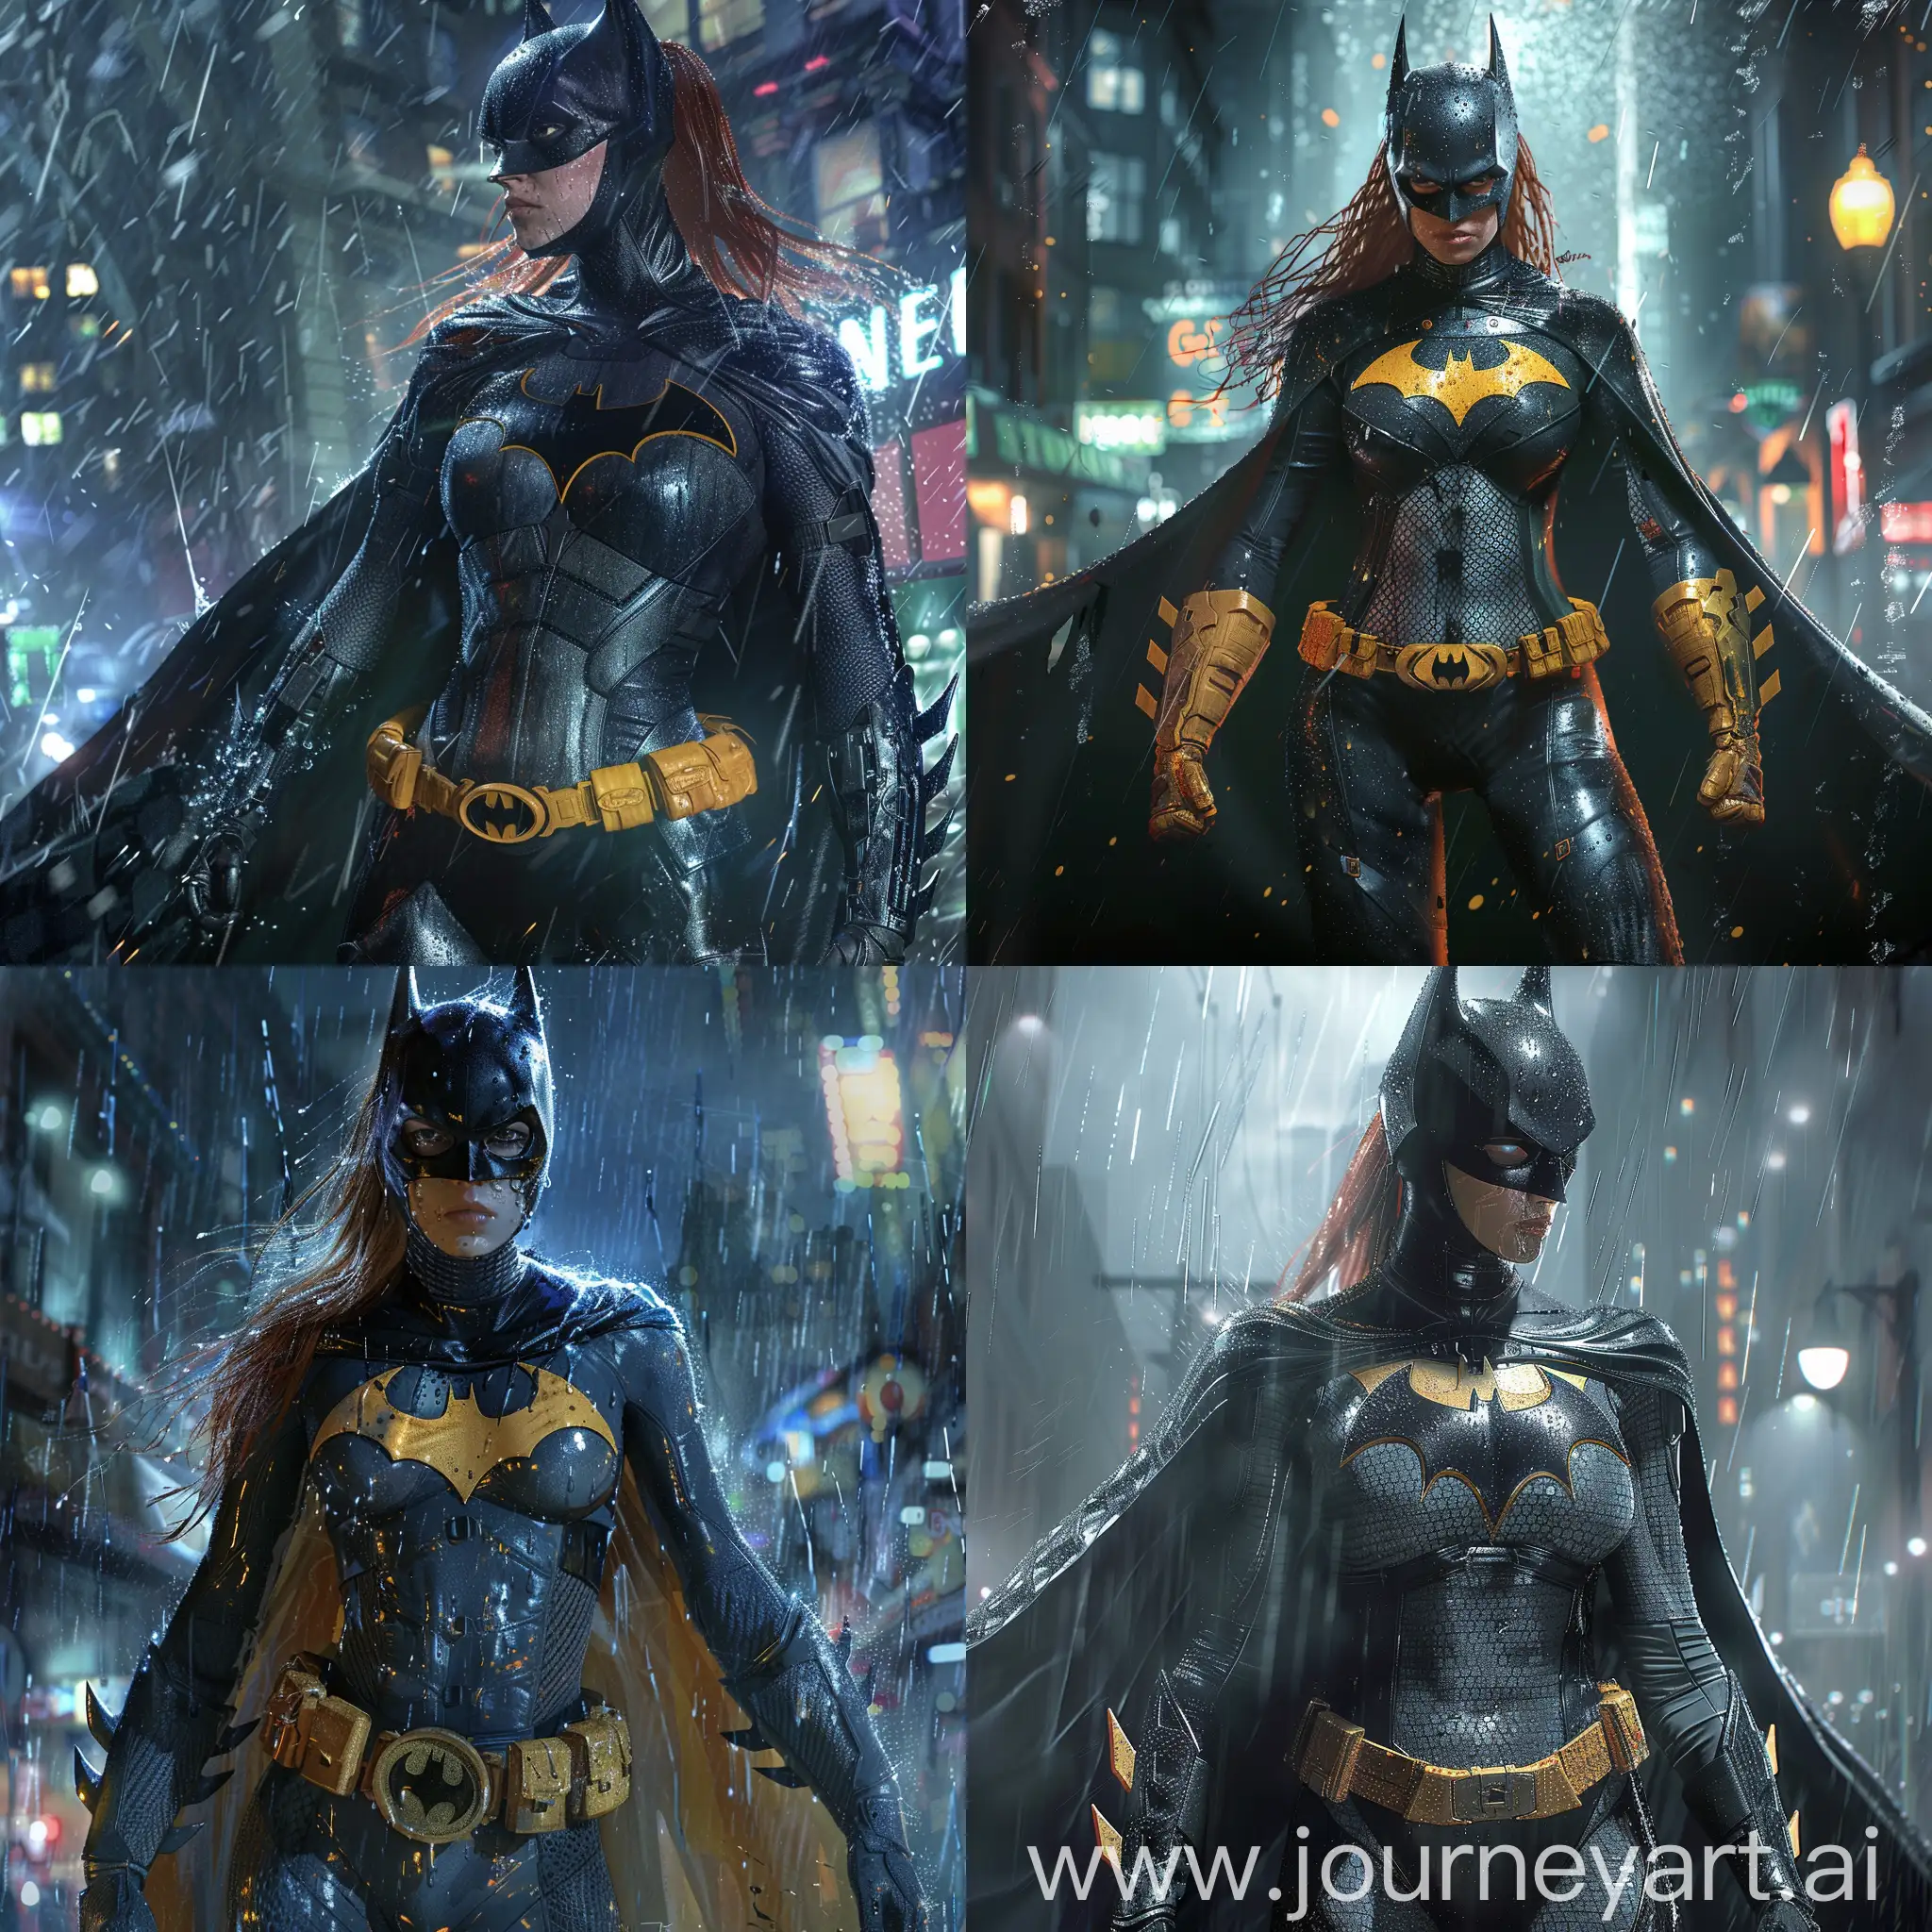 Create a realistic depiction of Batgirl wearing her classic costume, but with detailed modifications. The costume should resemble a tactical combat suit, with a mesh-like texture. Ensure the portrayal captures Batgirl's iconic features, including her cape, utility belt, and bat-symbol emblem. Place Batgirl in the city of Gotham, on a rainy night, with the rain wetting her costume. Depict her in full-body view, ready for action, and deliver the artwork wCreate a realistic depiction of Batgirl wearing her classic costume, but with detailed modifications. The costume should resemble a tactical combat suit, with a mesh-like texture. Ensure the portrayal captures Batgirl's iconic features, including her cape, utility belt, and bat-symbol emblem. Place Batgirl in the city of Gotham, on a rainy night, with the rain wetting her costume. Depict her in full-body view, ready for action, and deliver the artwork with realistic quality in 8K resolution."ith realistic quality in 8K resolution."